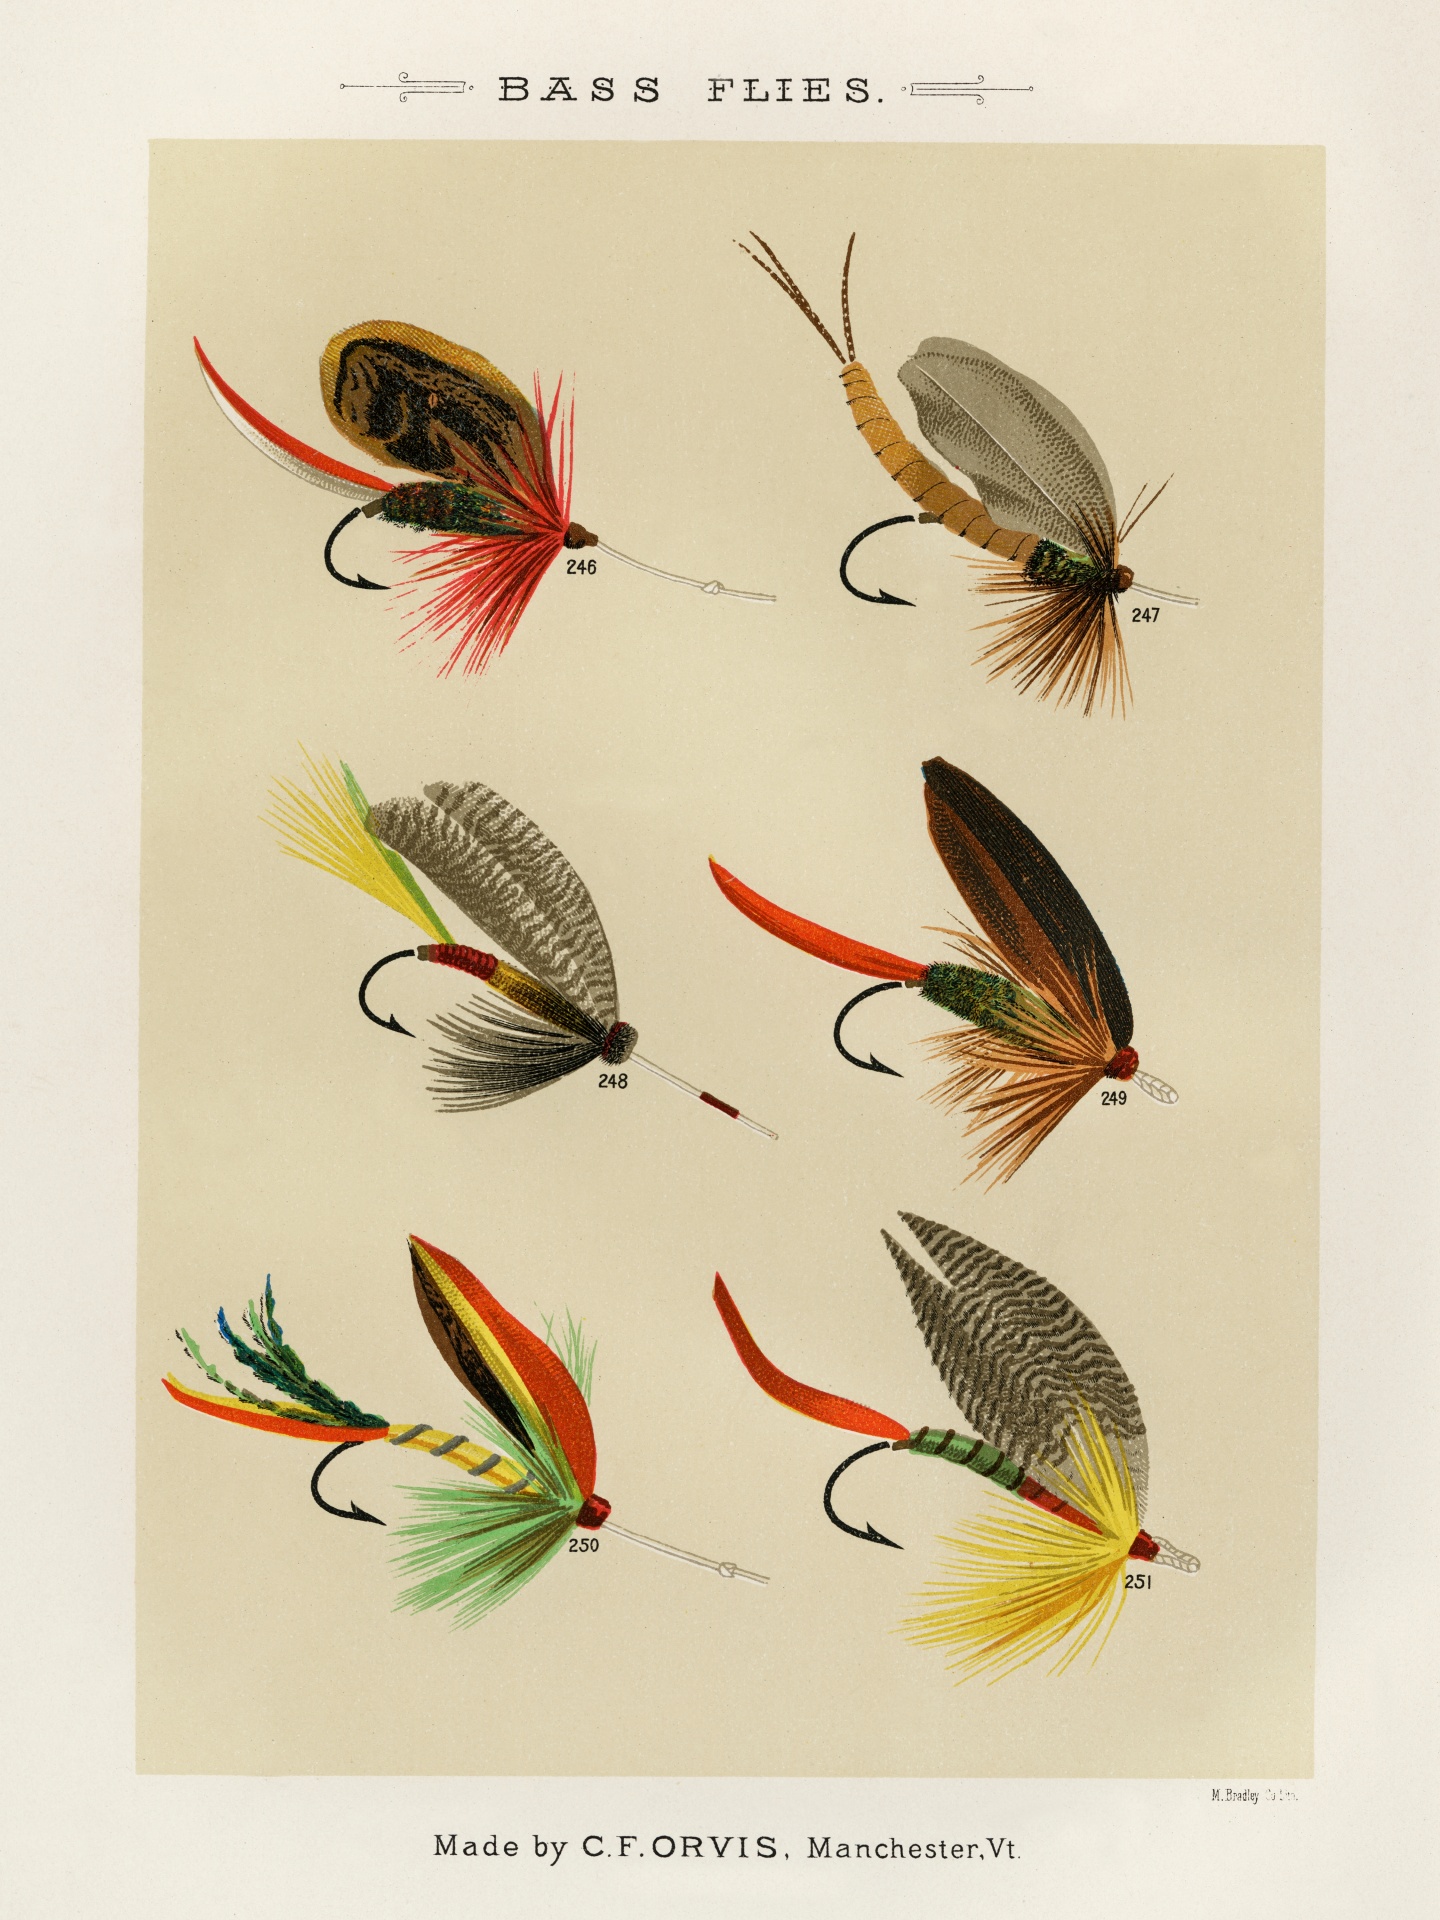 Fly fishing bait for trout salmon fish old illustration colored examples of bait flies picture restored spots removed